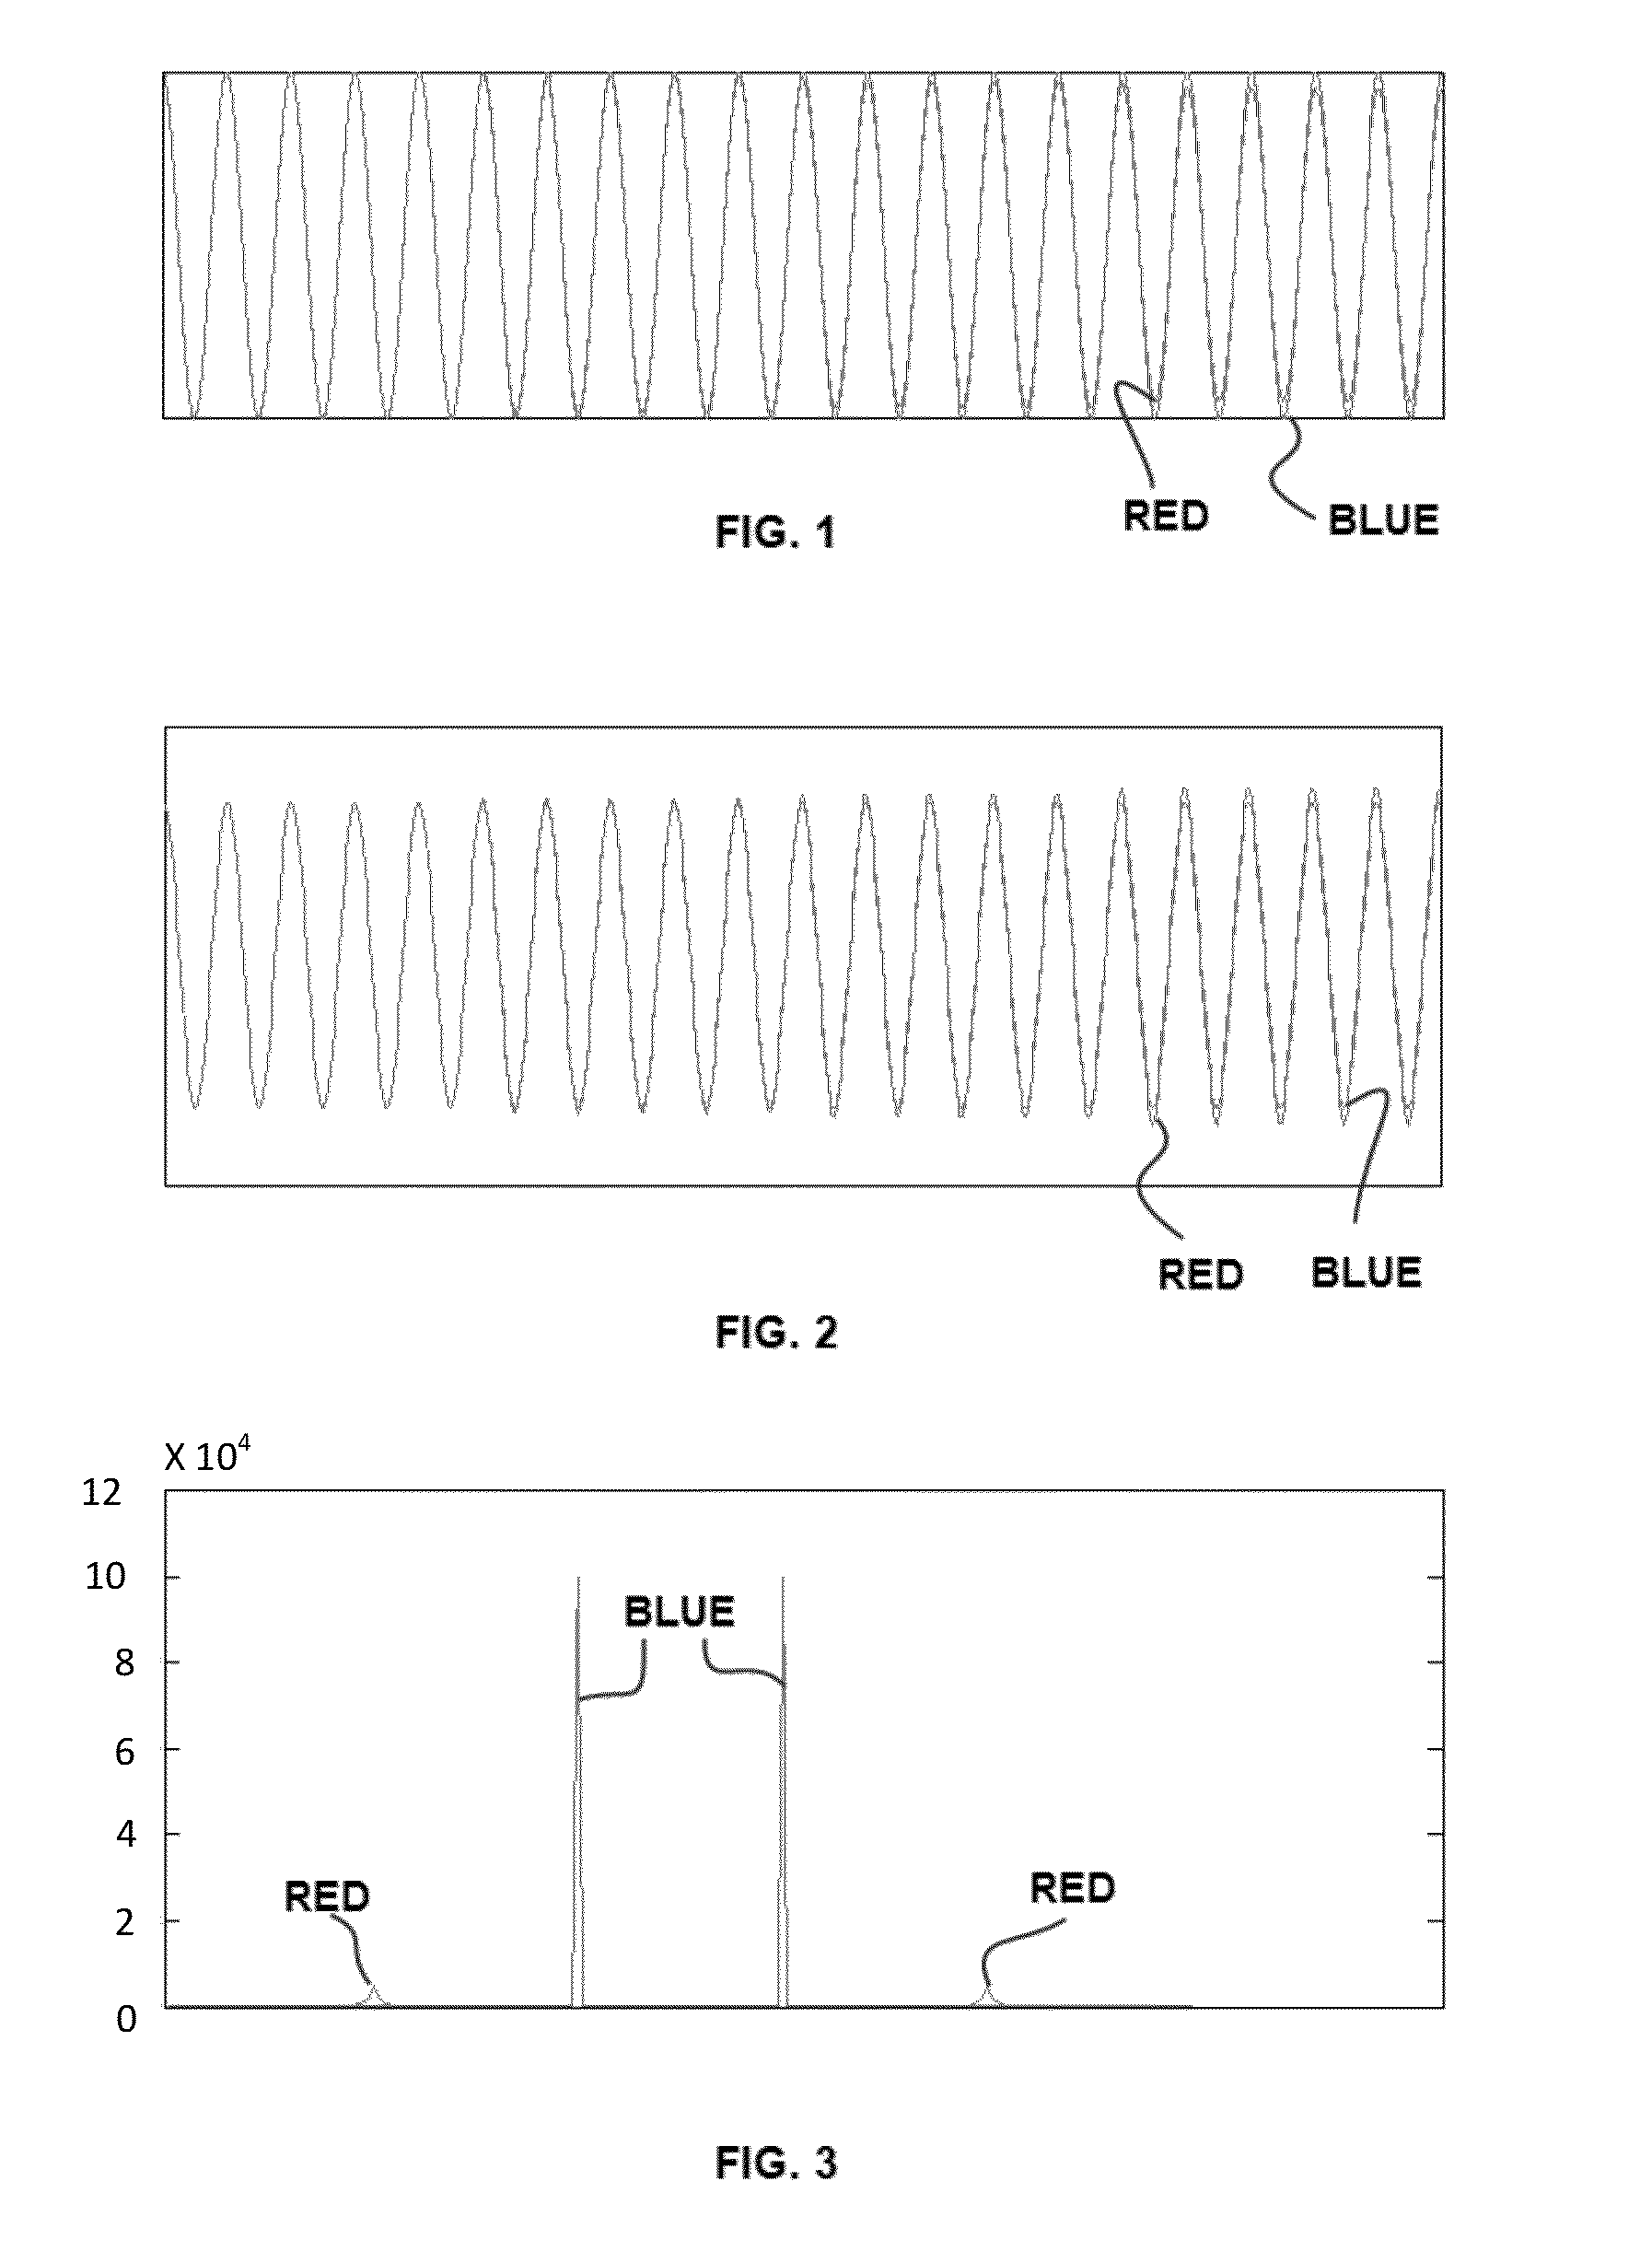 Method for RFID Communication Using Inductive Orthogonal Coupling For Wireless Medical Implanted Sensors and Other Short-Range Communication Applications